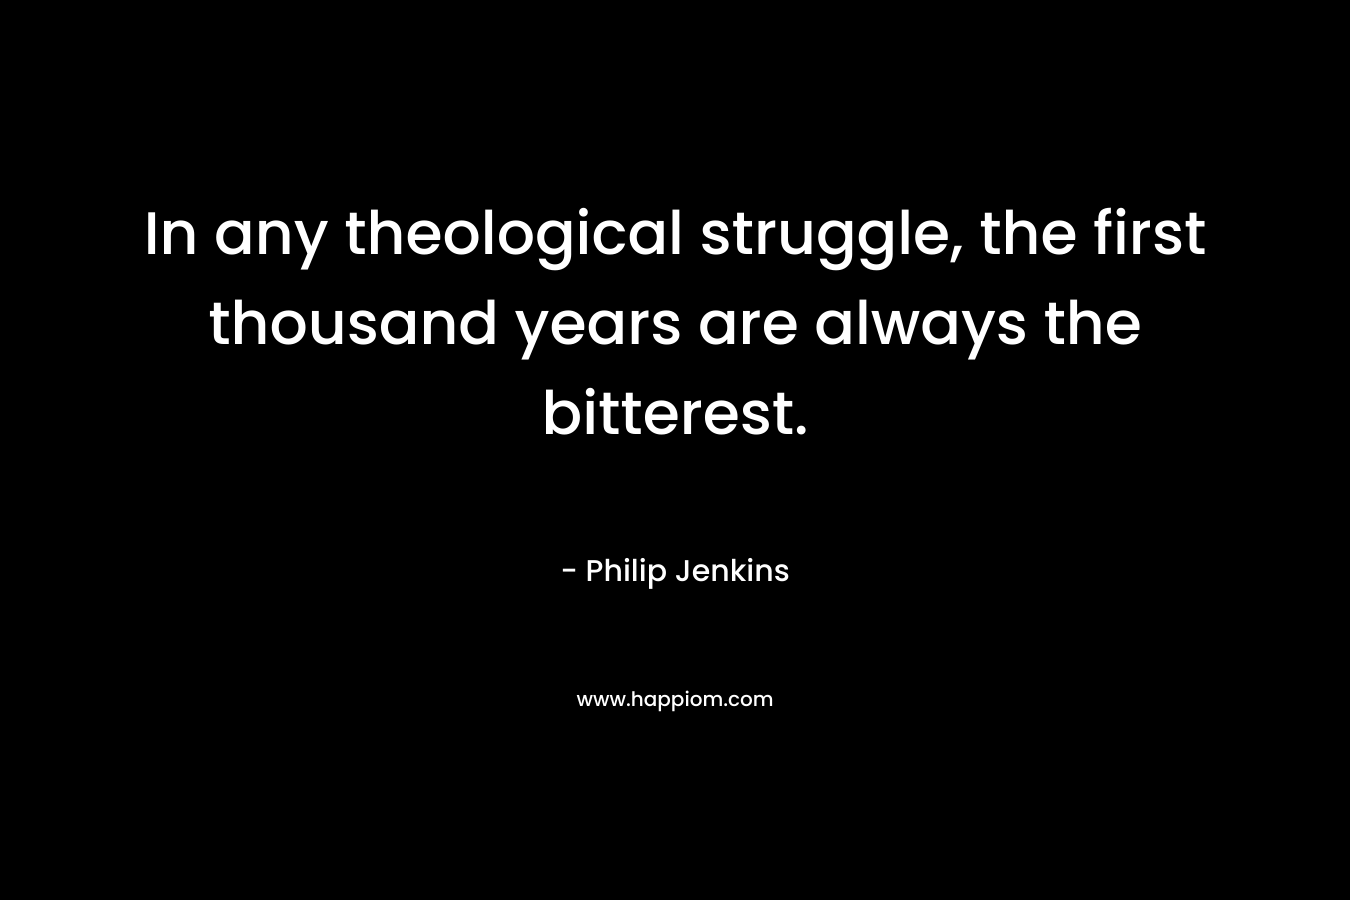 In any theological struggle, the first thousand years are always the bitterest. – Philip Jenkins